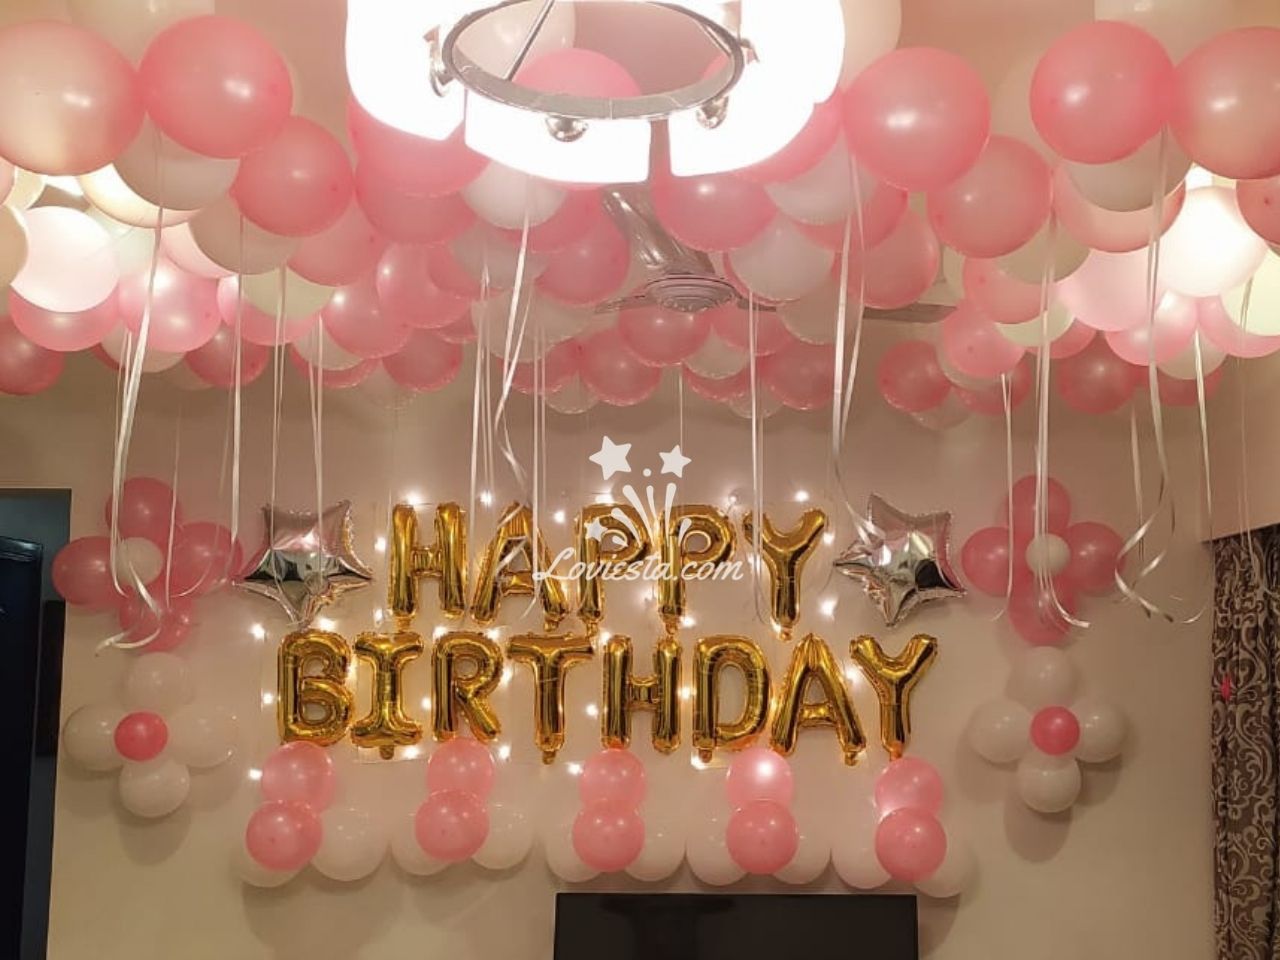 Surprise Balloon Decoration At Home